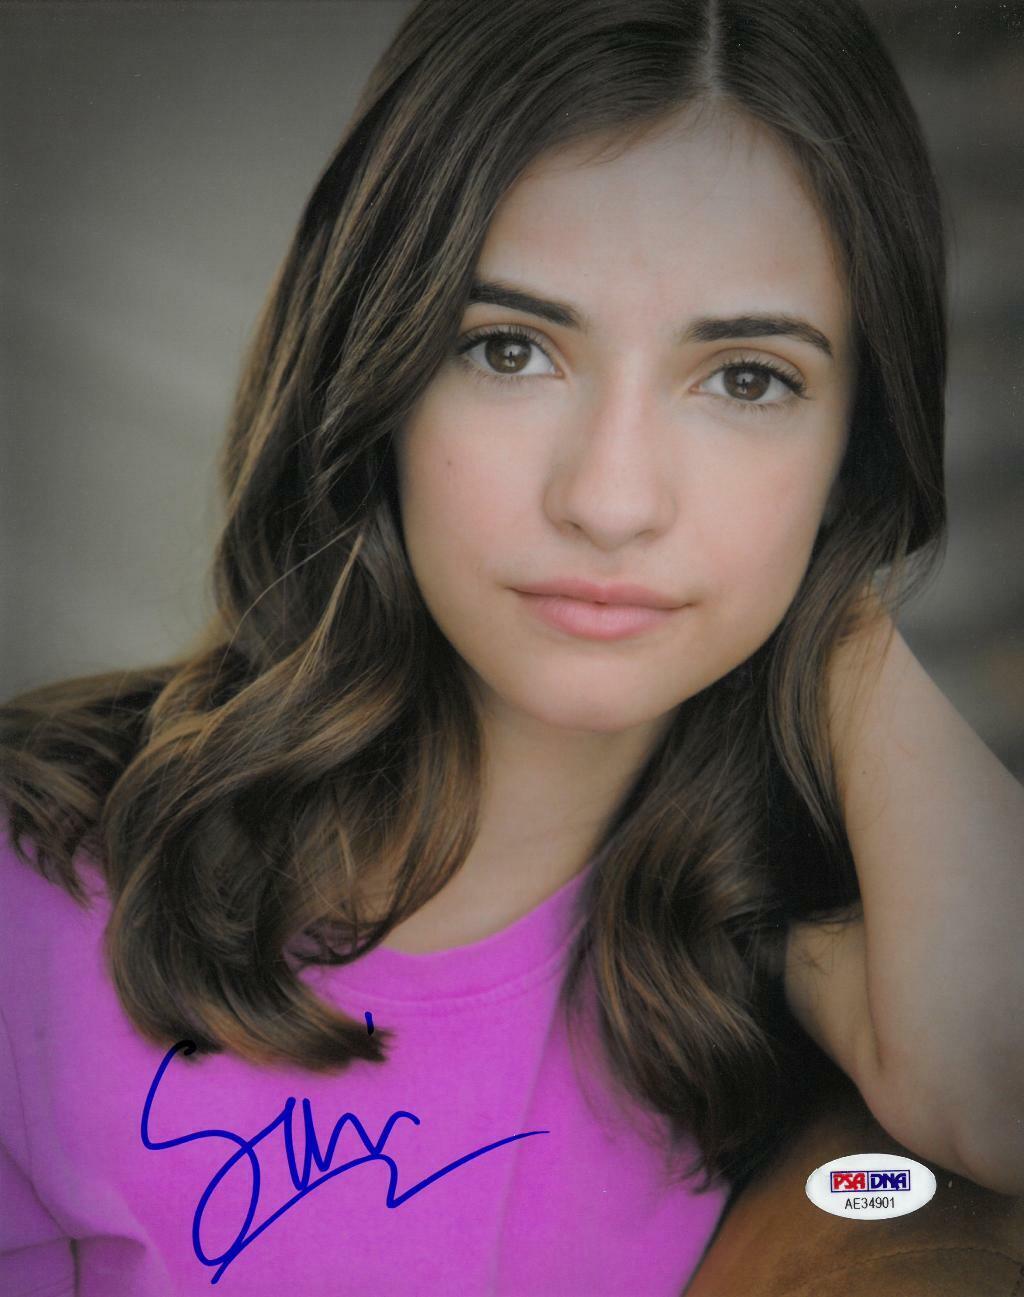 Soni Bringas Signed Authentic Autographed 8x10 Photo Poster painting PSA/DNA #AE34901